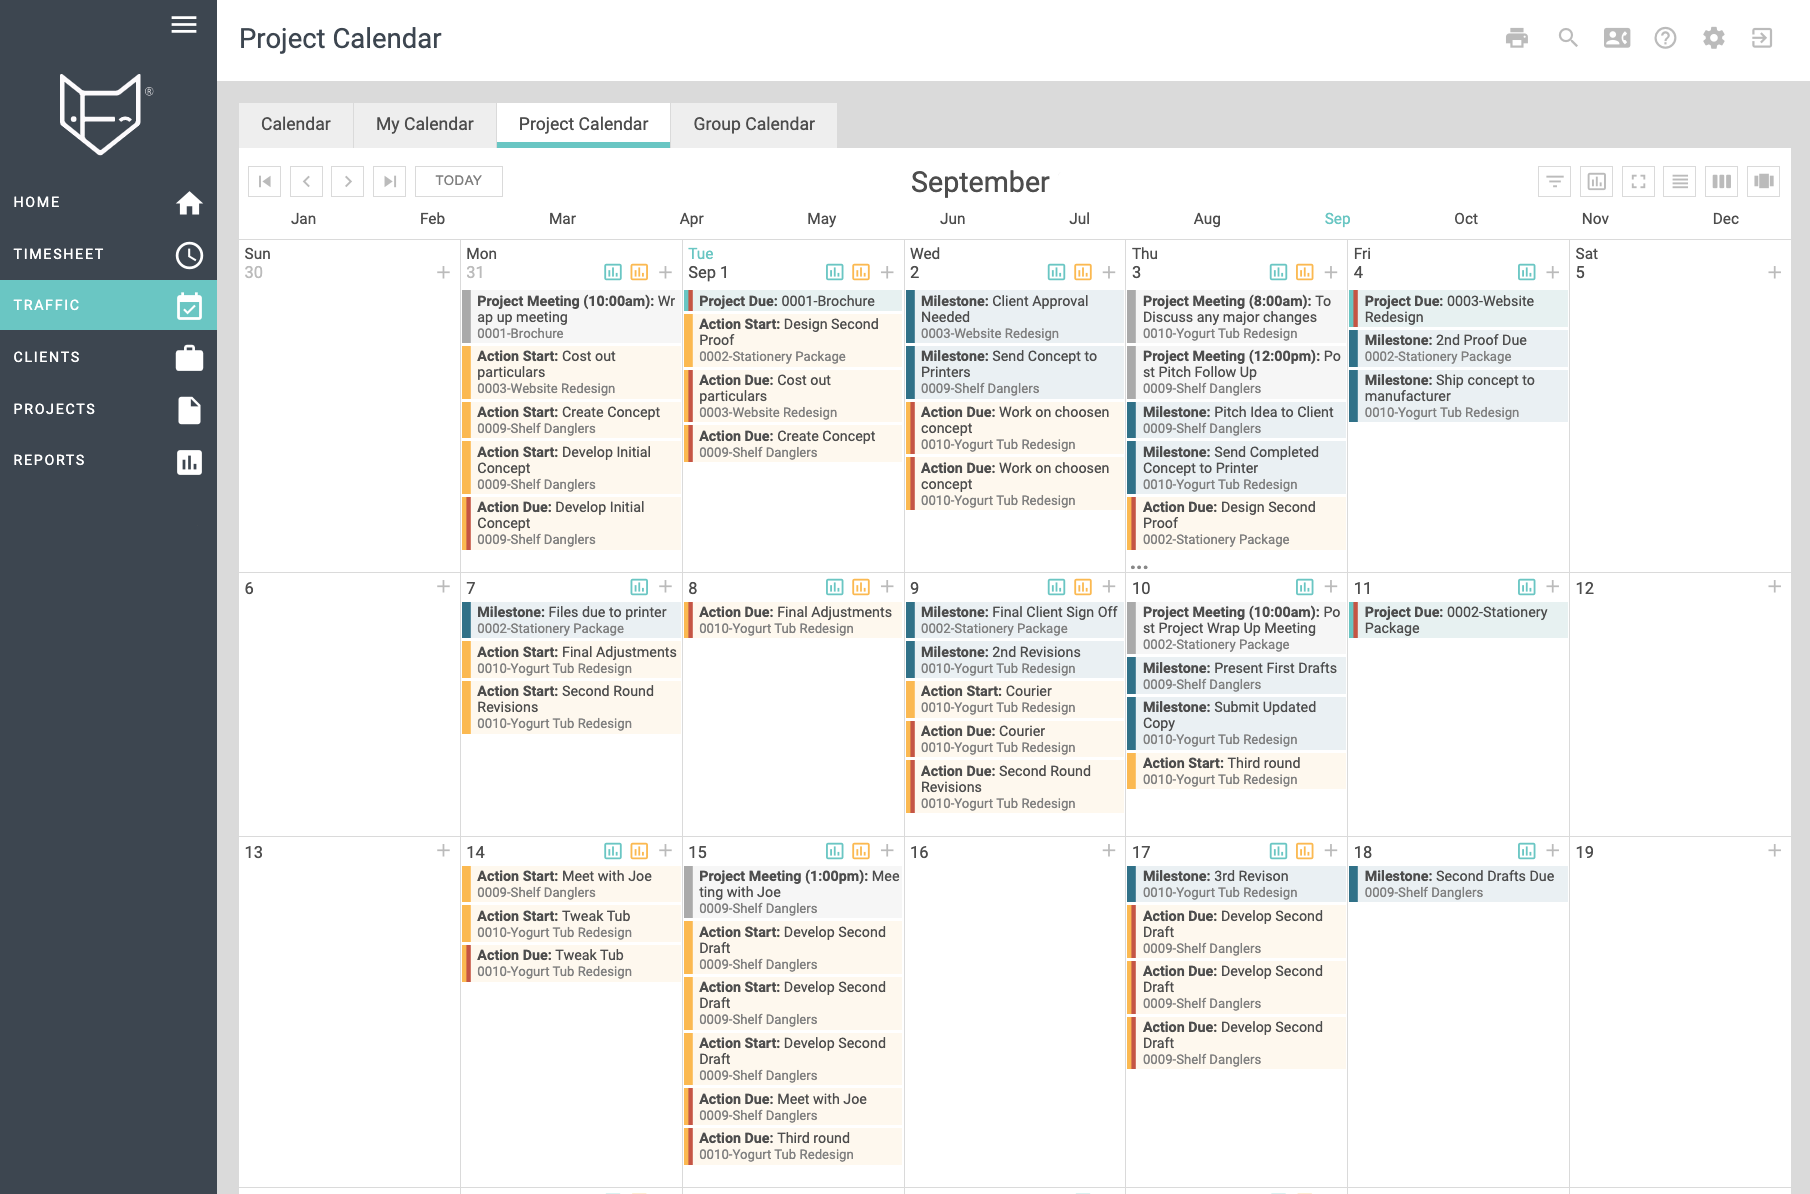 FunctionFox Calendar: Choose to view all your system calendars in one view, or view individually. Your account includes a Personnel Calendar, Group Calendar, as well as a Project Calendar for Premier accounts.